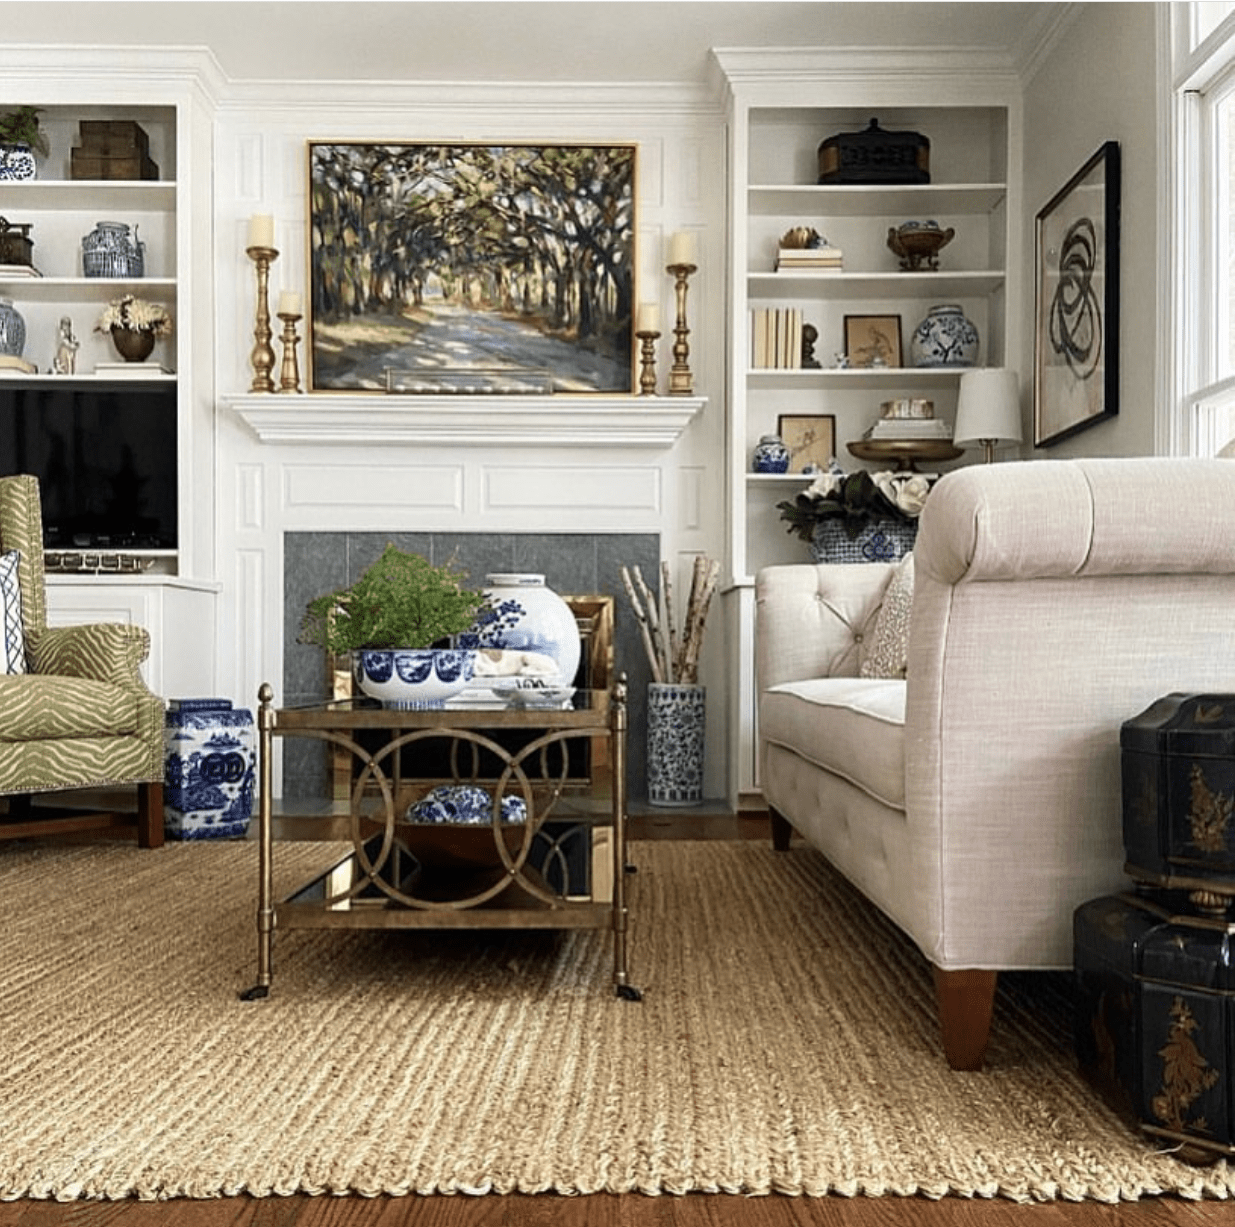 traditional living room at the southern charm home tour